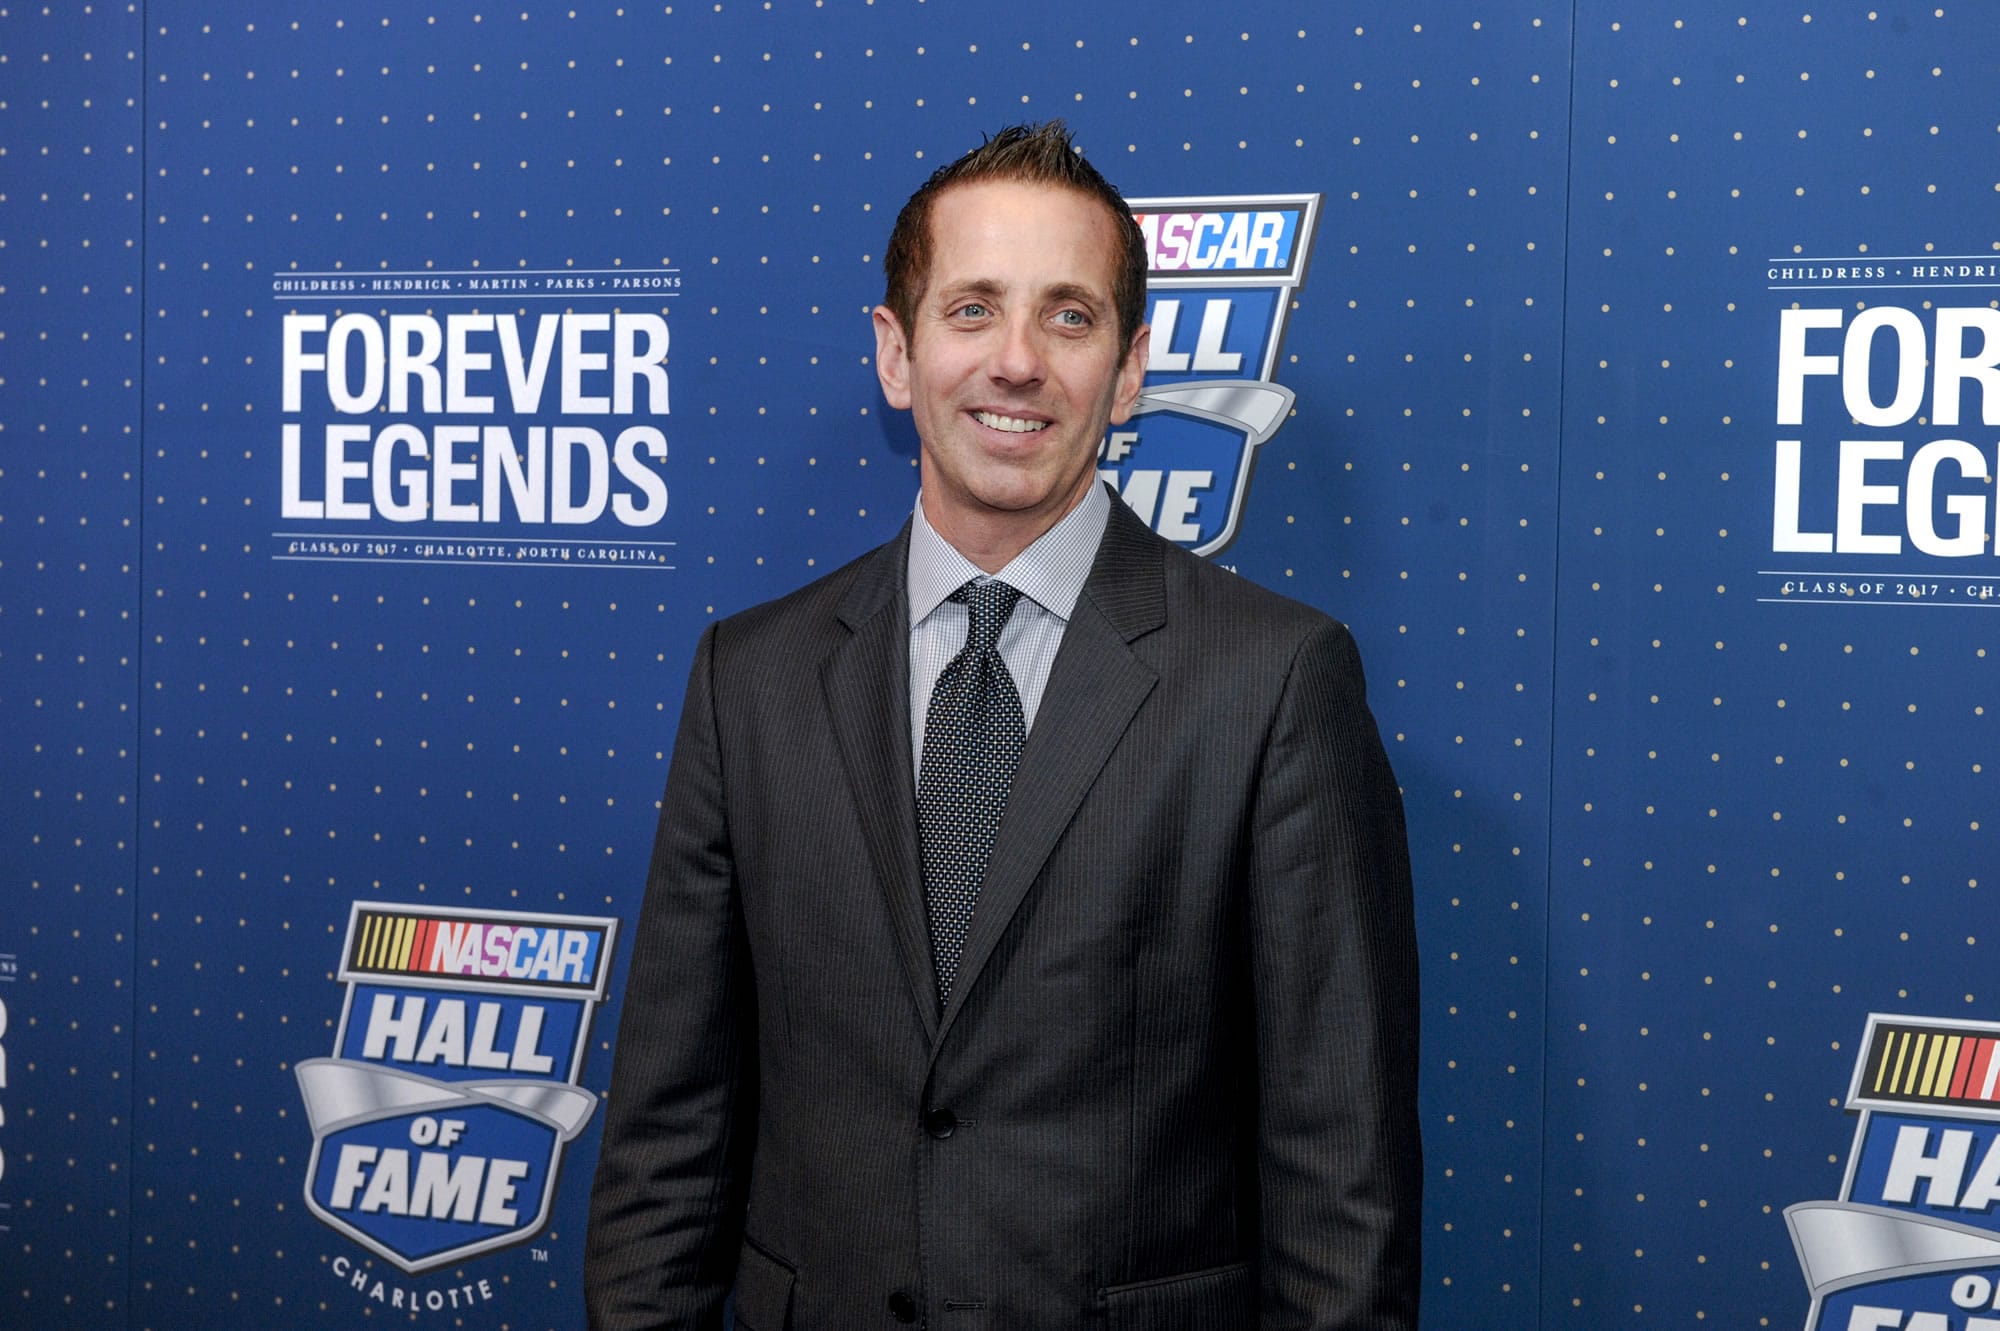 Clark County native Greg Biffle won't race full time this NASCAR season. Biffle announced Friday, Feb. 17, 2017,  via Twitter that he has accepted a recurring role as a guest analyst on NBC Sports' "NASCAR America" show. He says his debut is March 1.